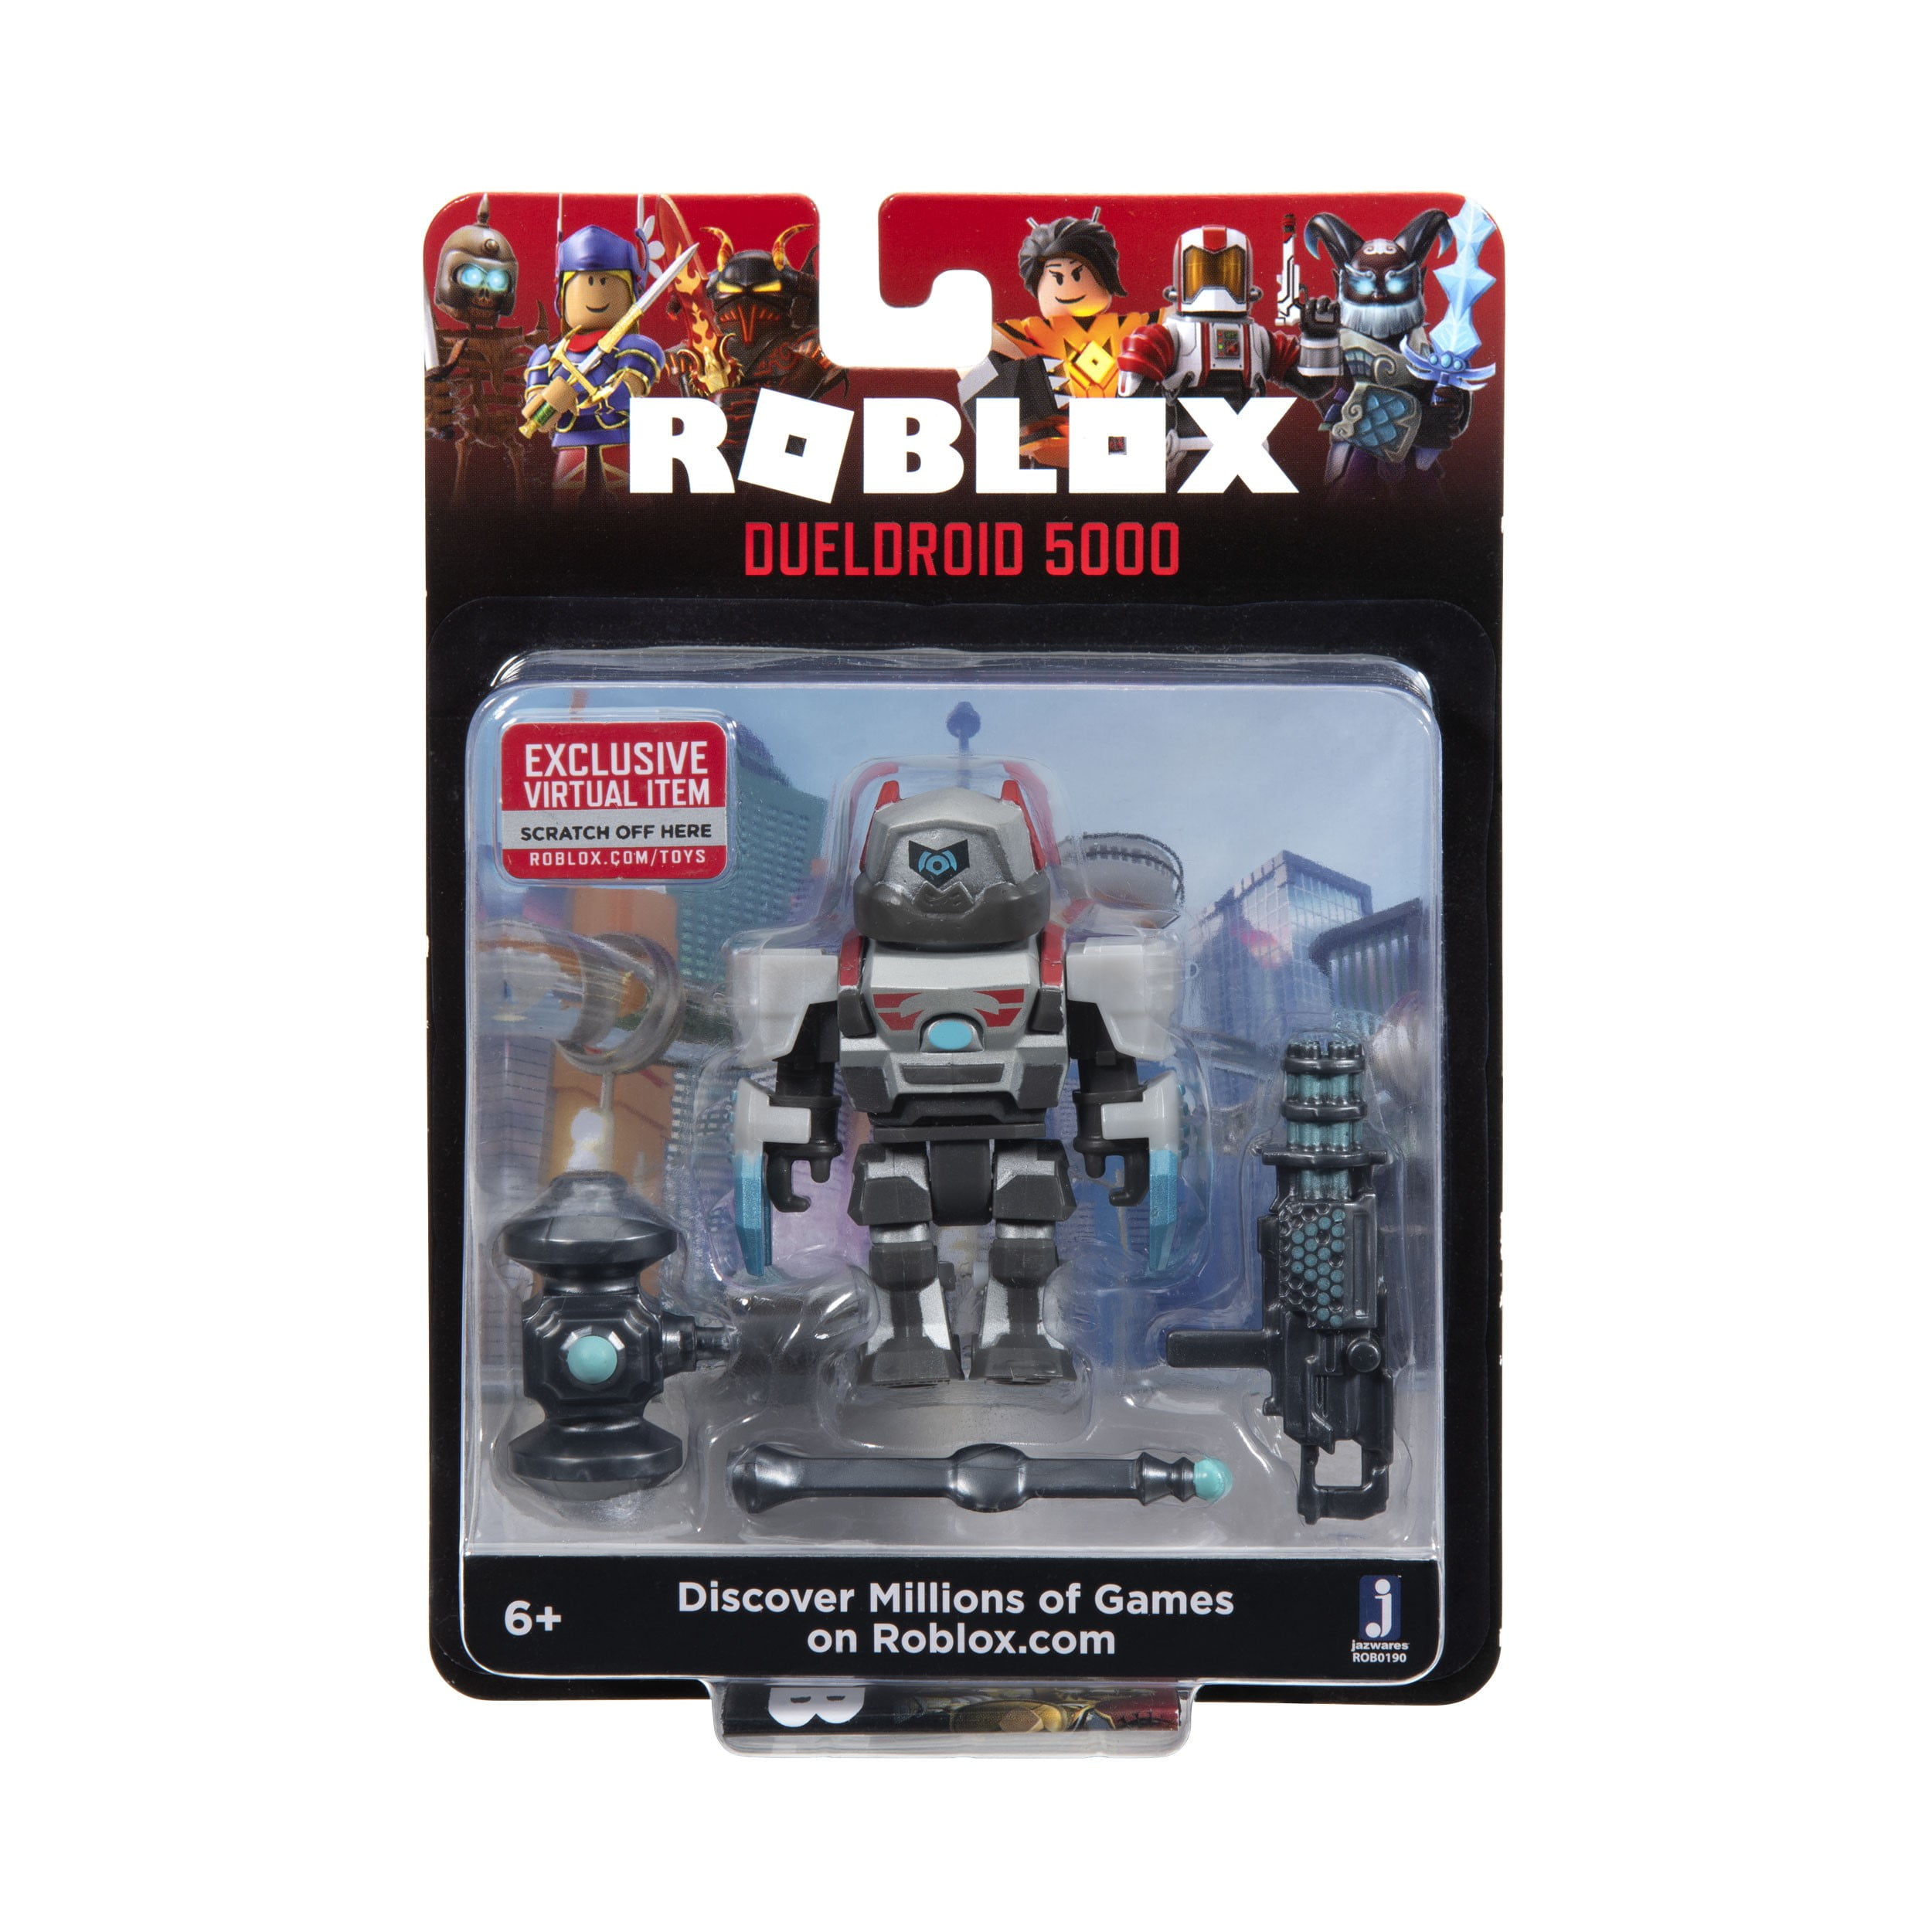 Roblox Action Collection Dueldroid 5000 Figure Pack Includes Exclusive Virtual Item Walmart Com Walmart Com - details about roblox toys action figures dueldroid 5000 with virtual game code accessories